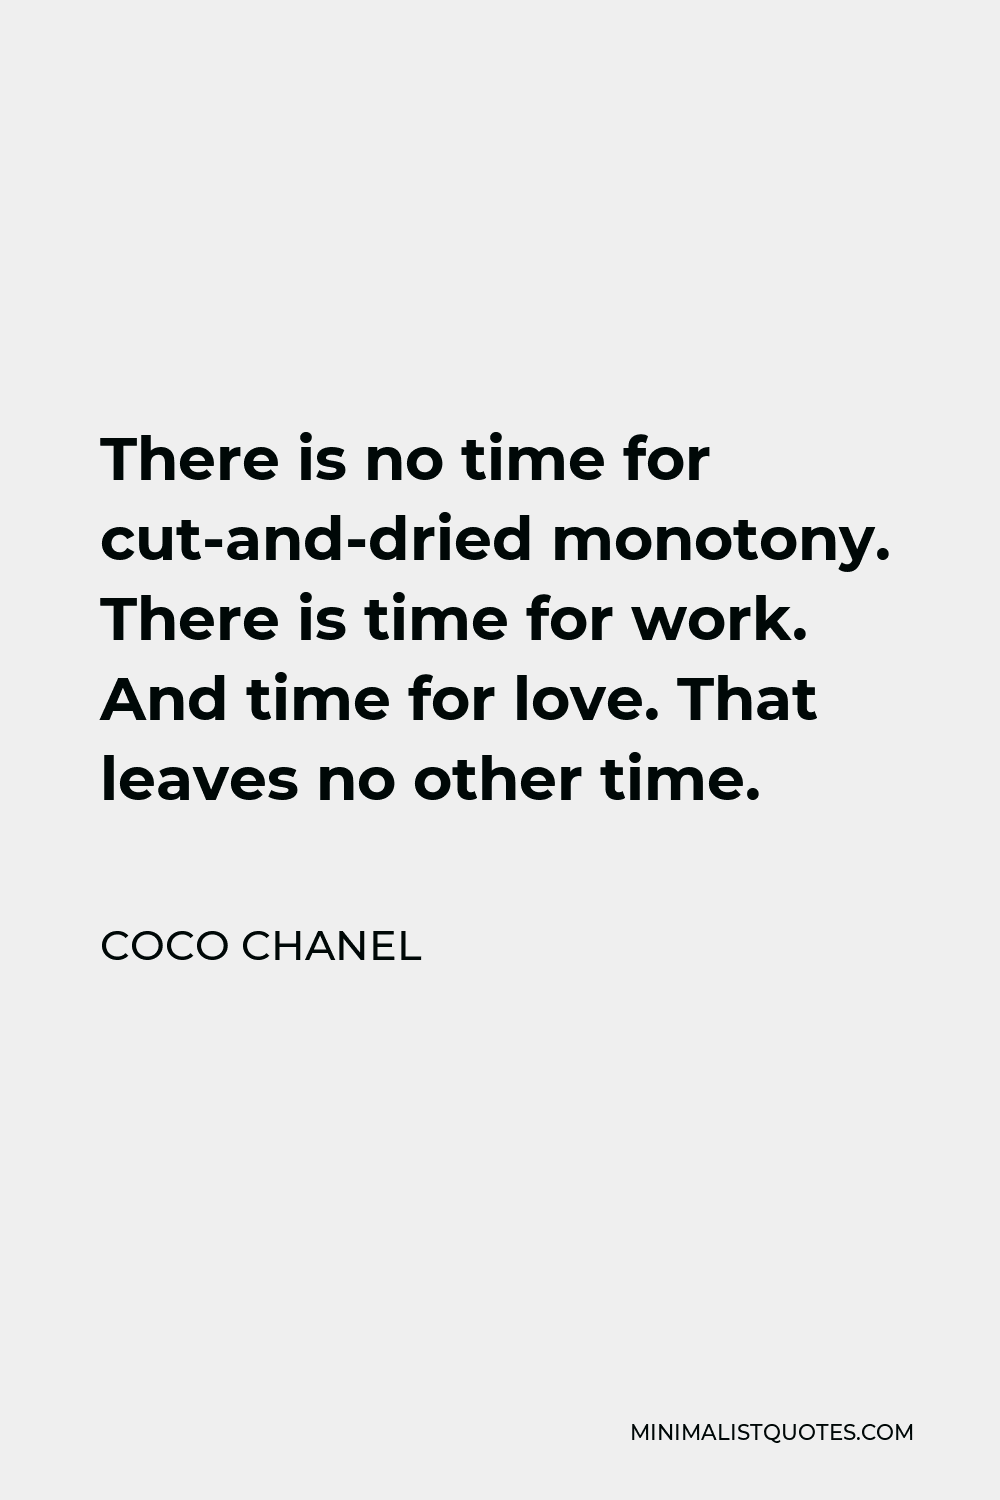 Coco Chanel Quote - There is no time for cut-and-dried monotony. There is time for work. And time for love. That leaves no other time.